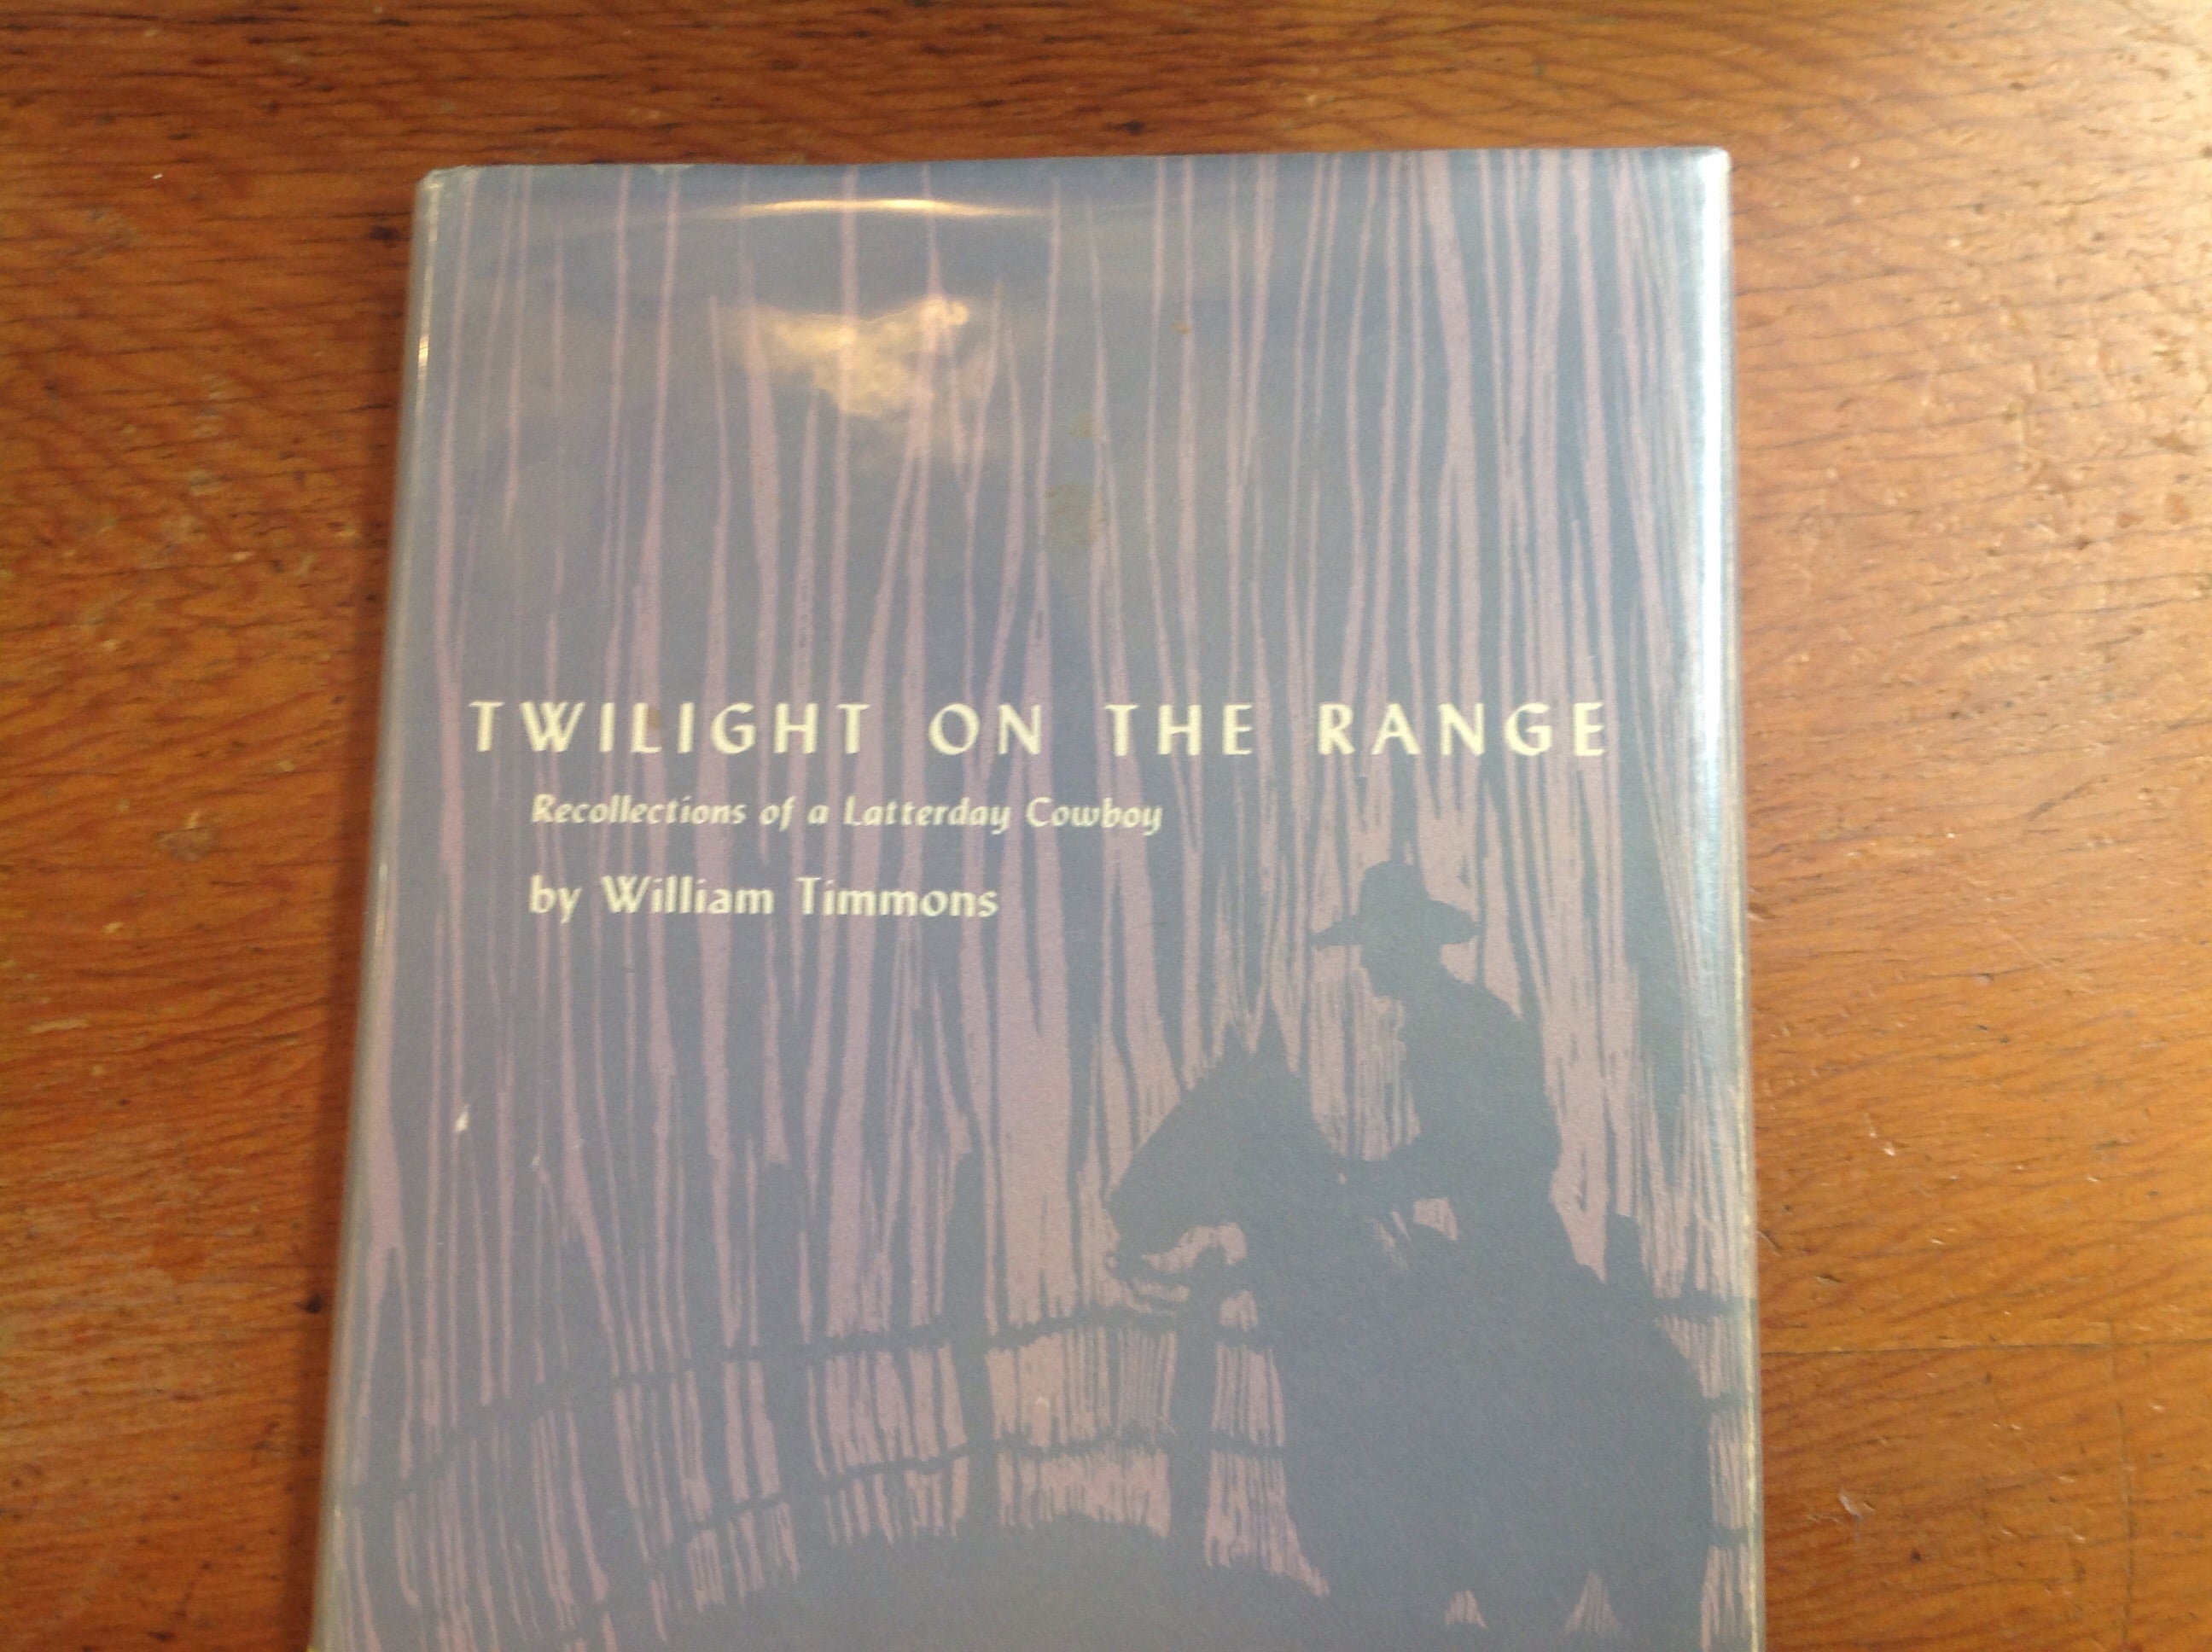 BOOKS - Twilight On The Range: Recollections of a Latterday Cowboy